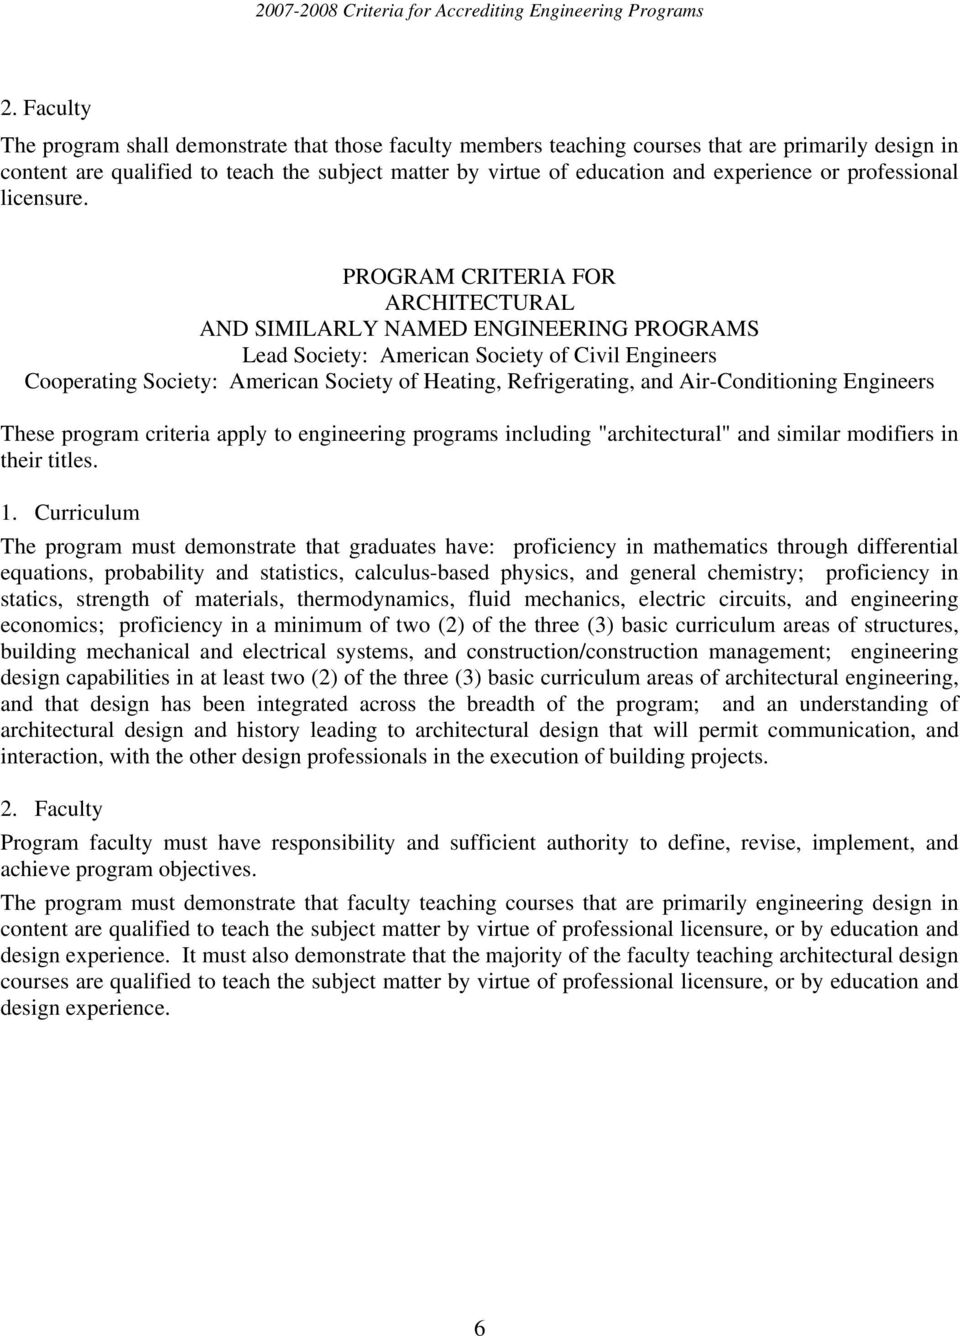 ARCHITECTURAL Lead Society: American Society of Civil Engineers Cooperating Society: American Society of Heating, Refrigerating, and Air-Conditioning Engineers These program criteria apply to